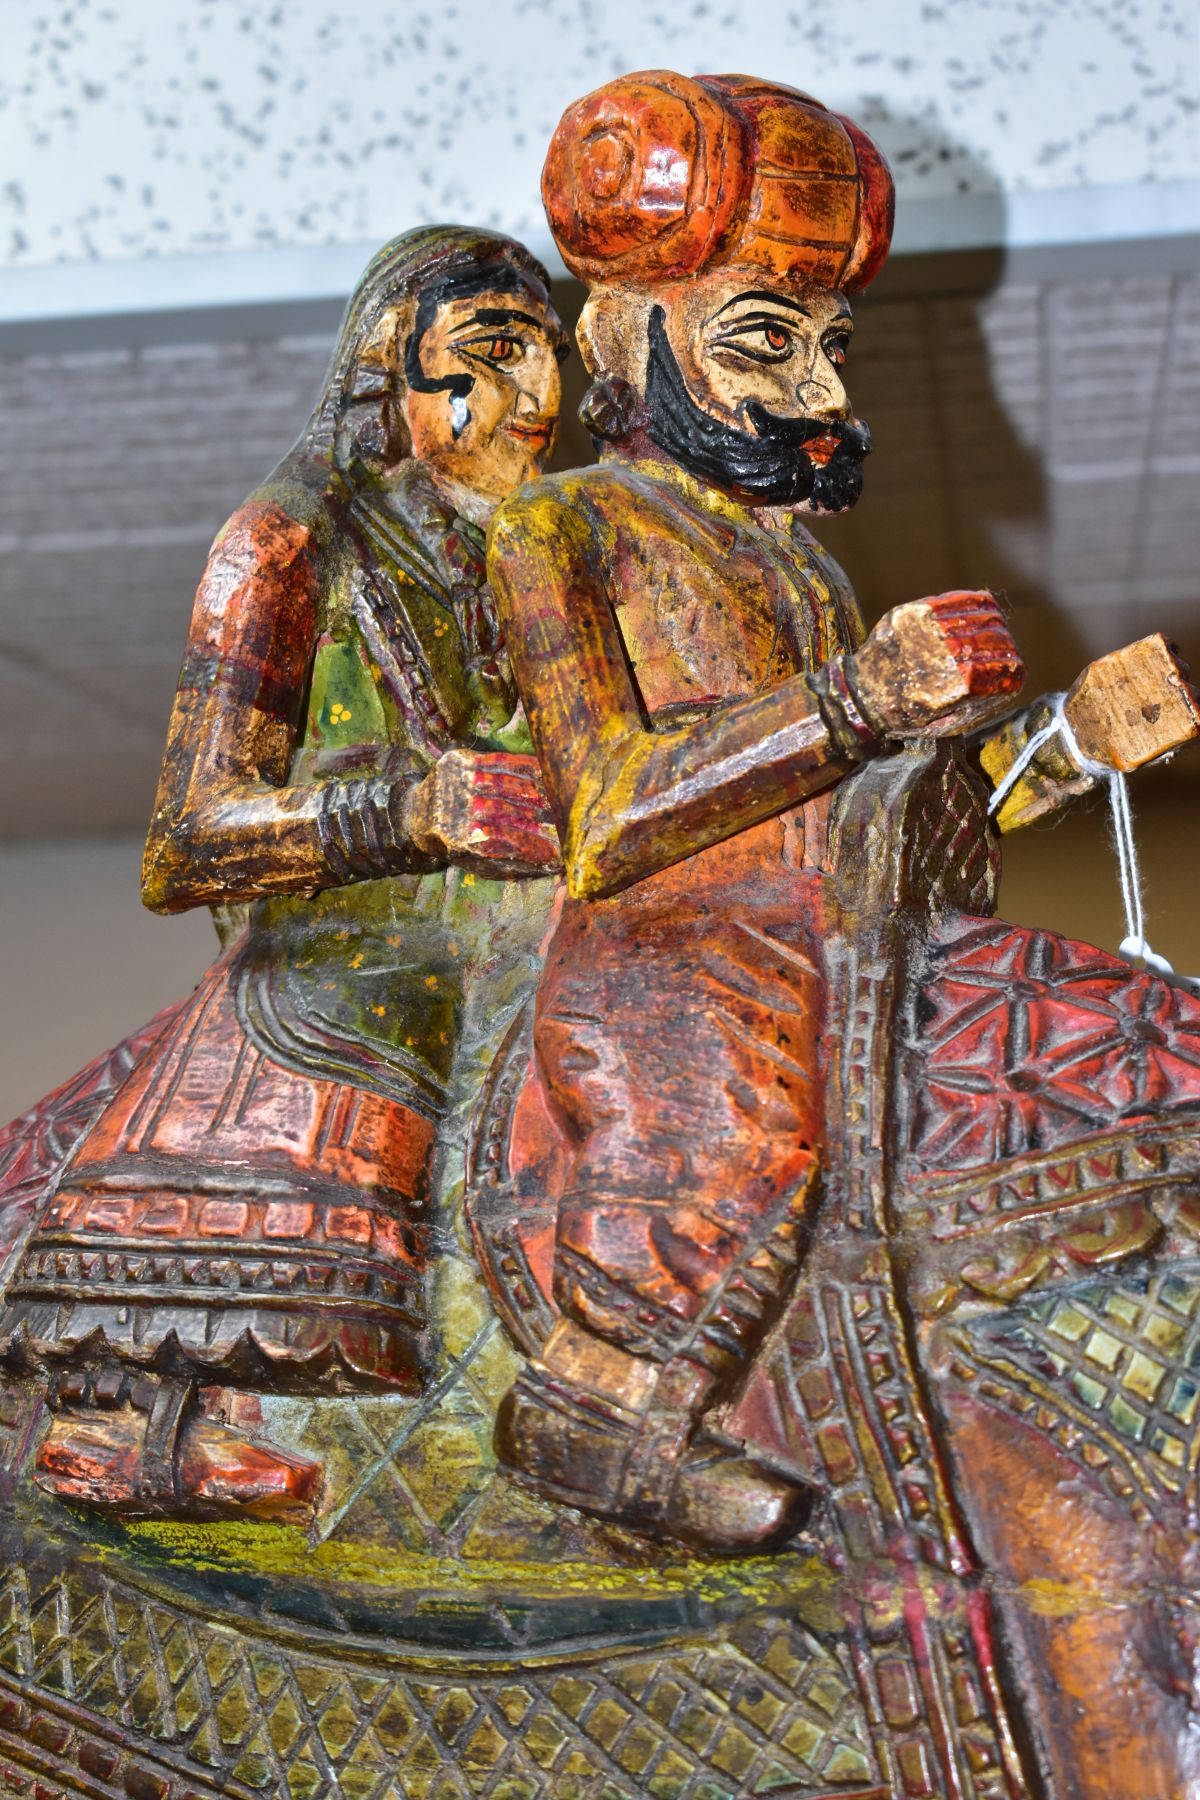 A LARGE WOODEN CARVED CAMEL WITH RIDERS, with carved and painted details, it may depict the - Image 6 of 9